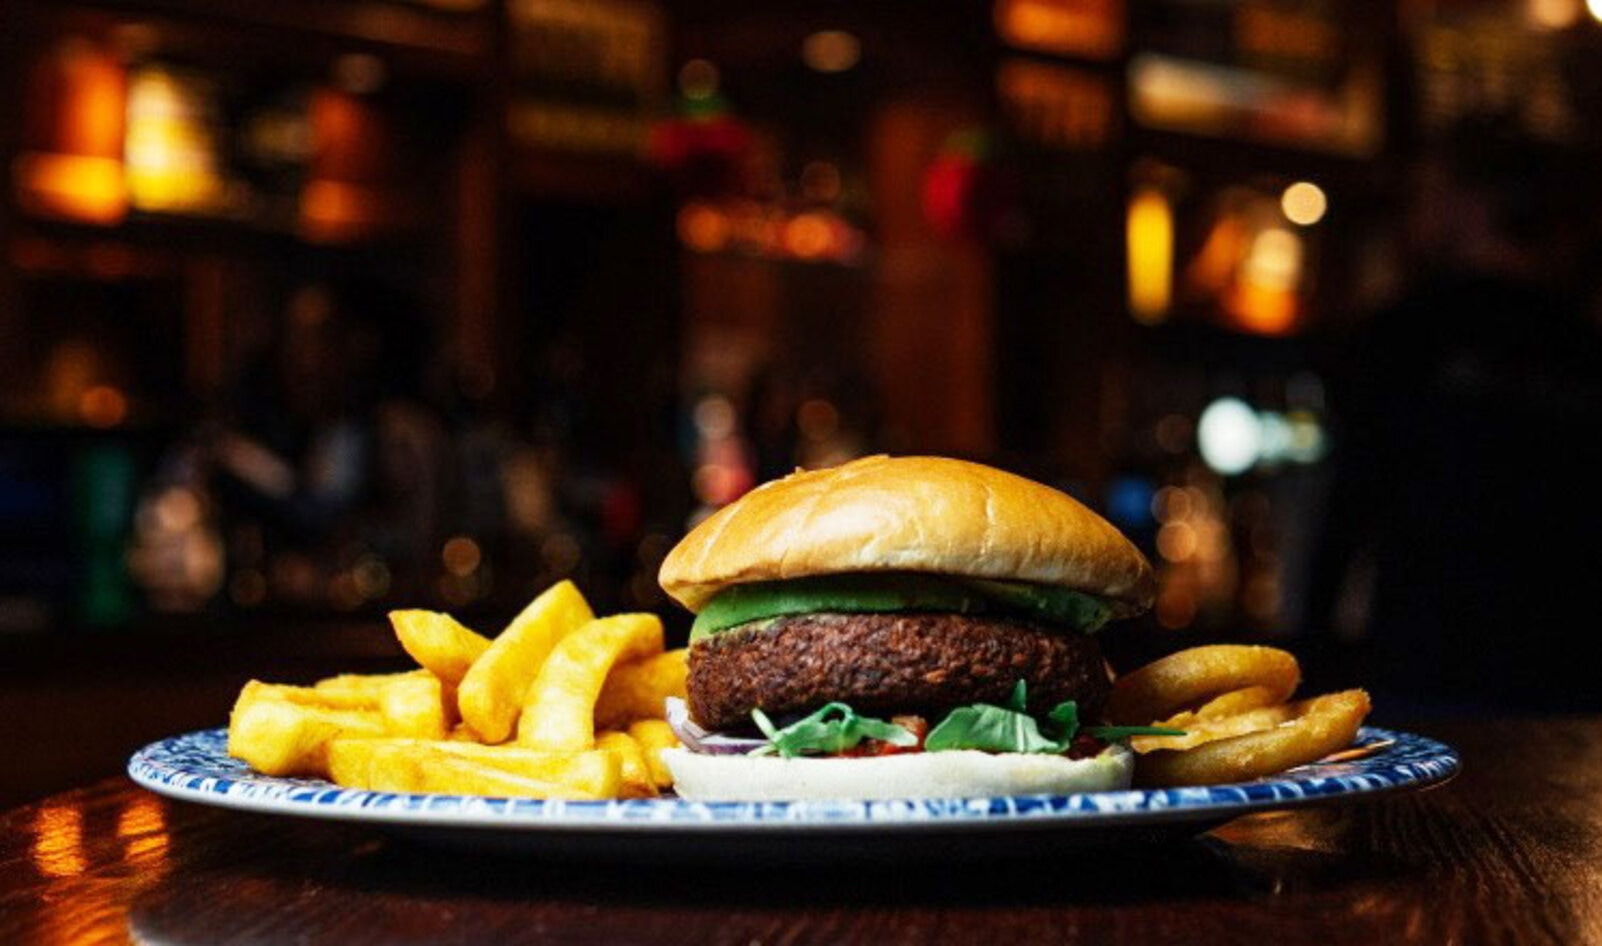 UK Chain Wetherspoons Adds Its First Vegan Burger to 880 Locations&nbsp;